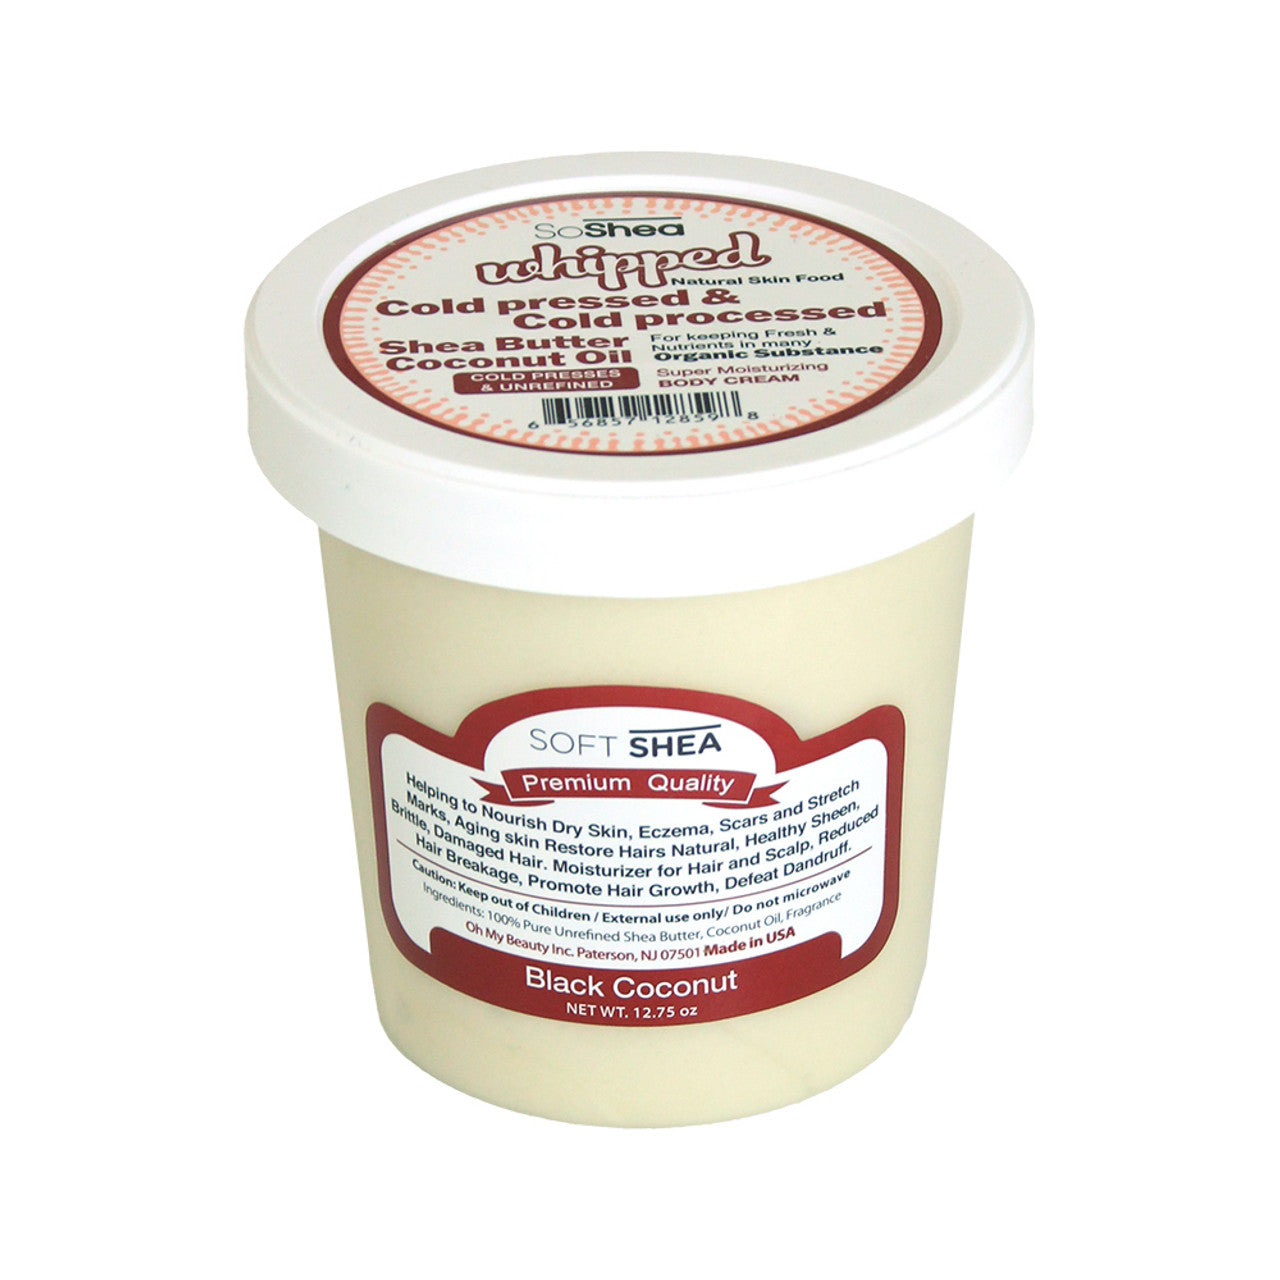 Whipped Shea Butter w/Coconut Oil - Black Coconut 12.75 oz.